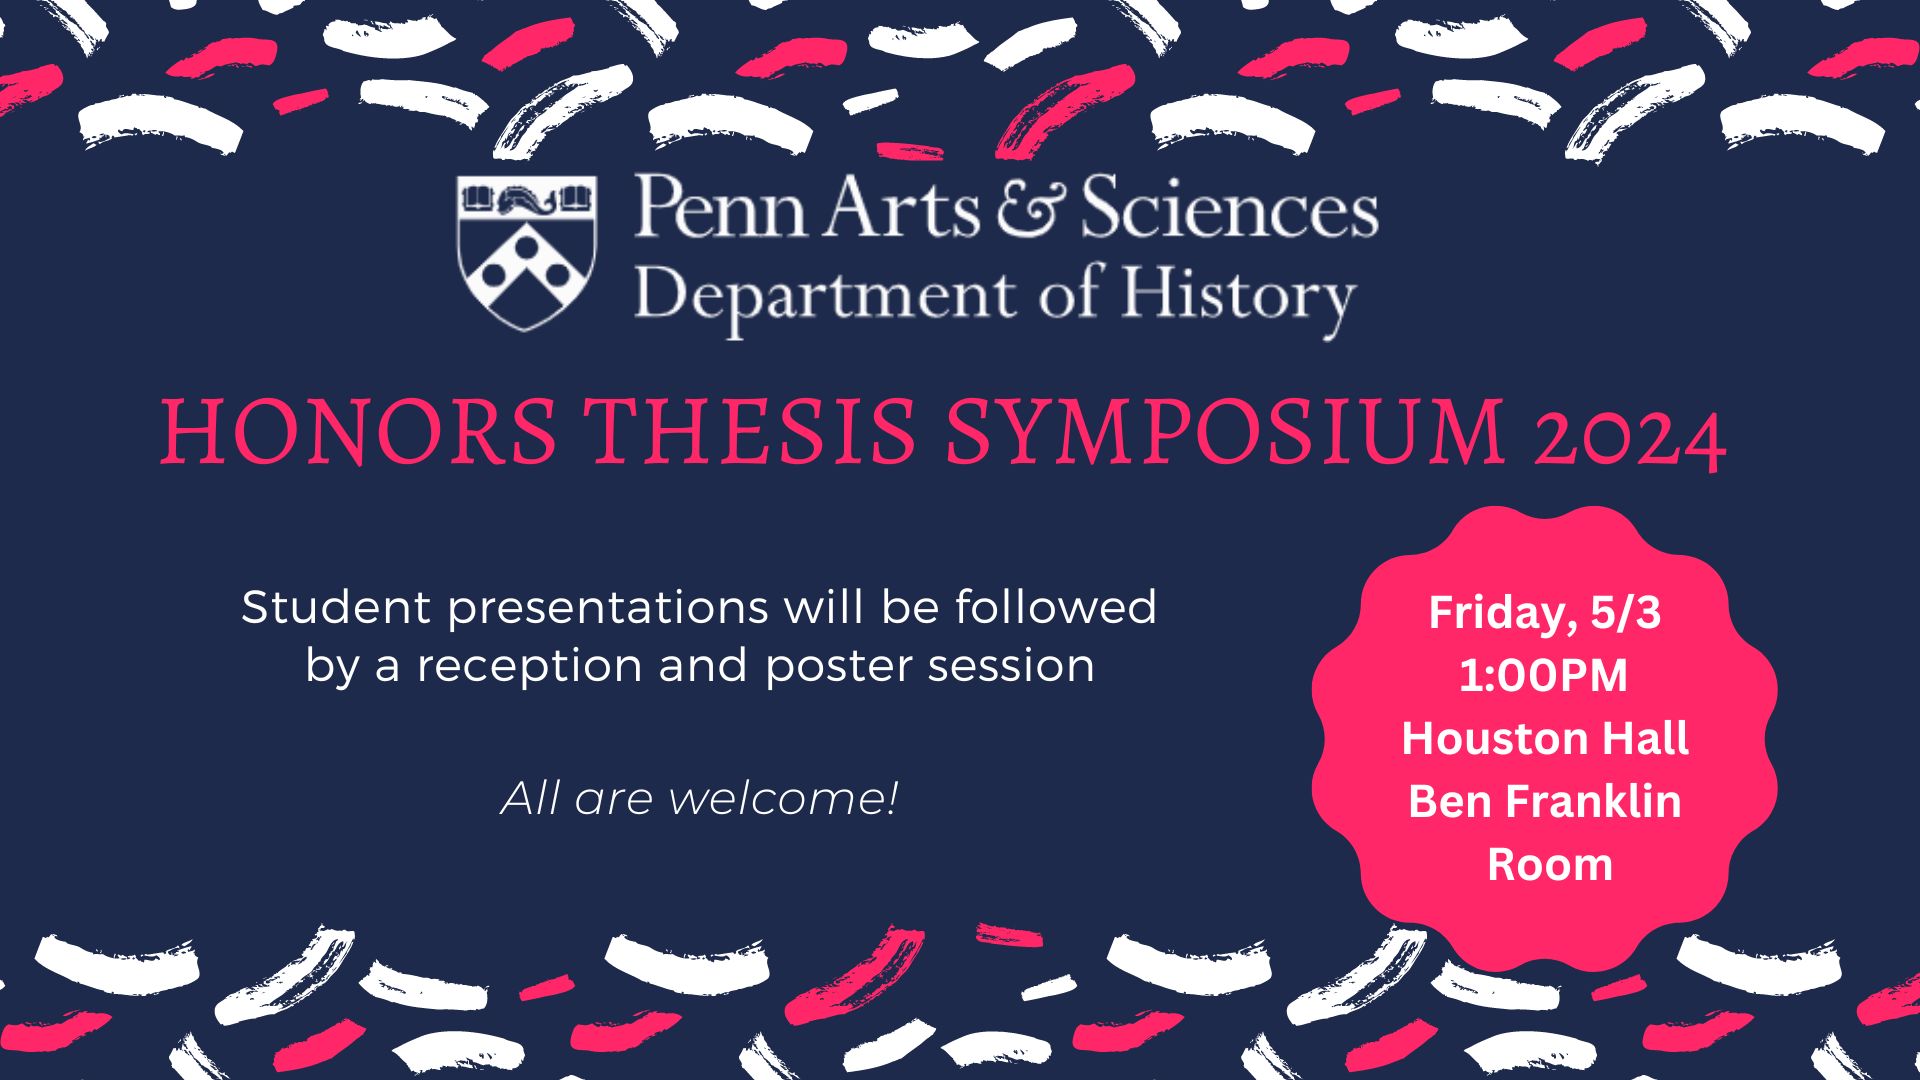 Blue background, confetti at top and bottom. Text reads "Penn Arts and Sciences, Department of History, Honors Thesis Symposium. Student presentations will be followed by poster presentations and reception.